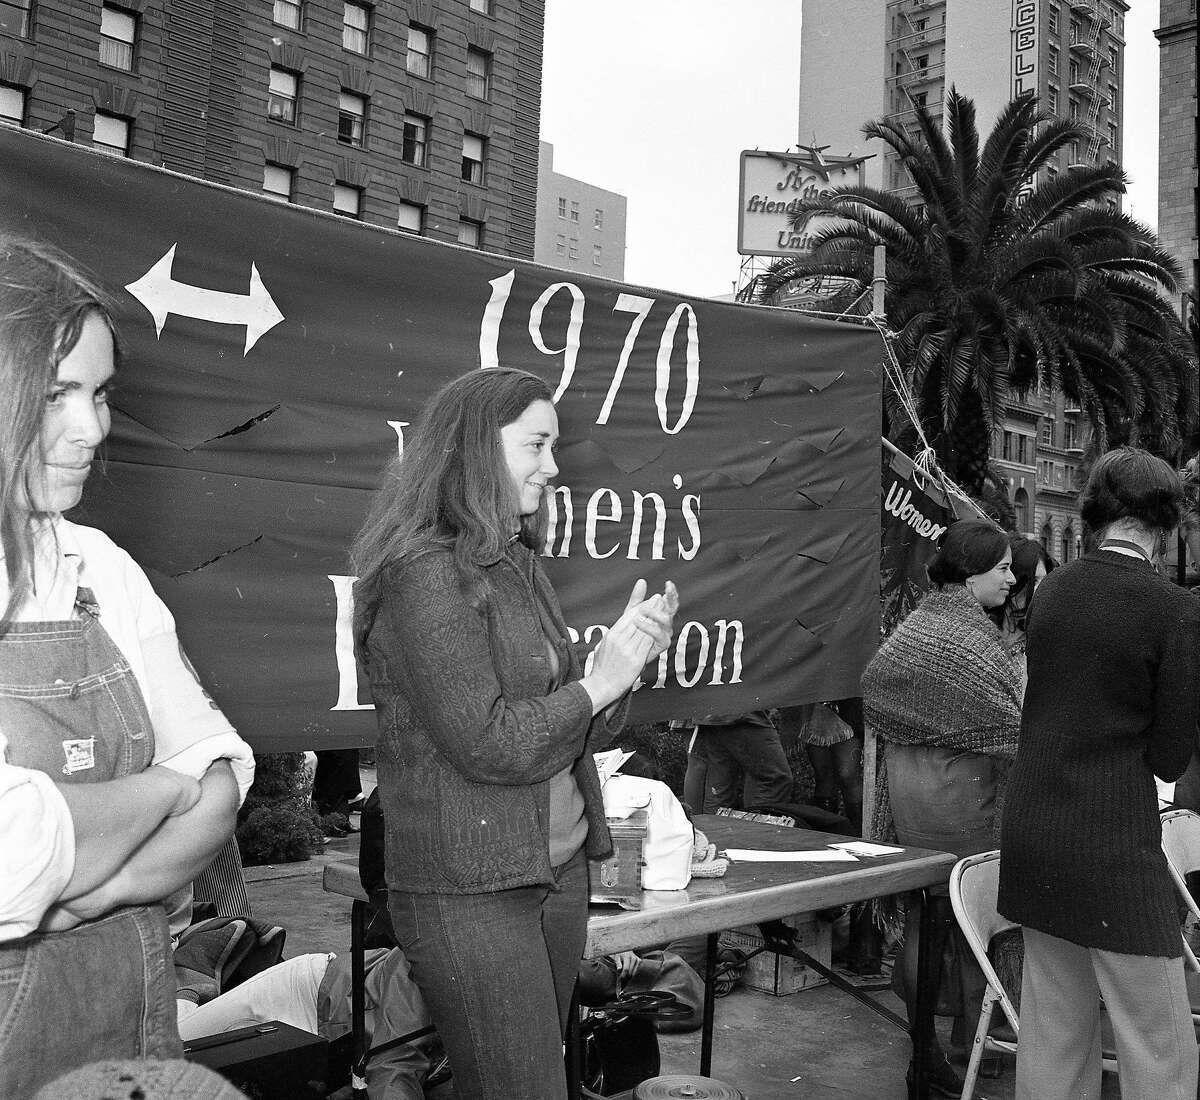 Women's Liberation rally at Union Square, September 1970